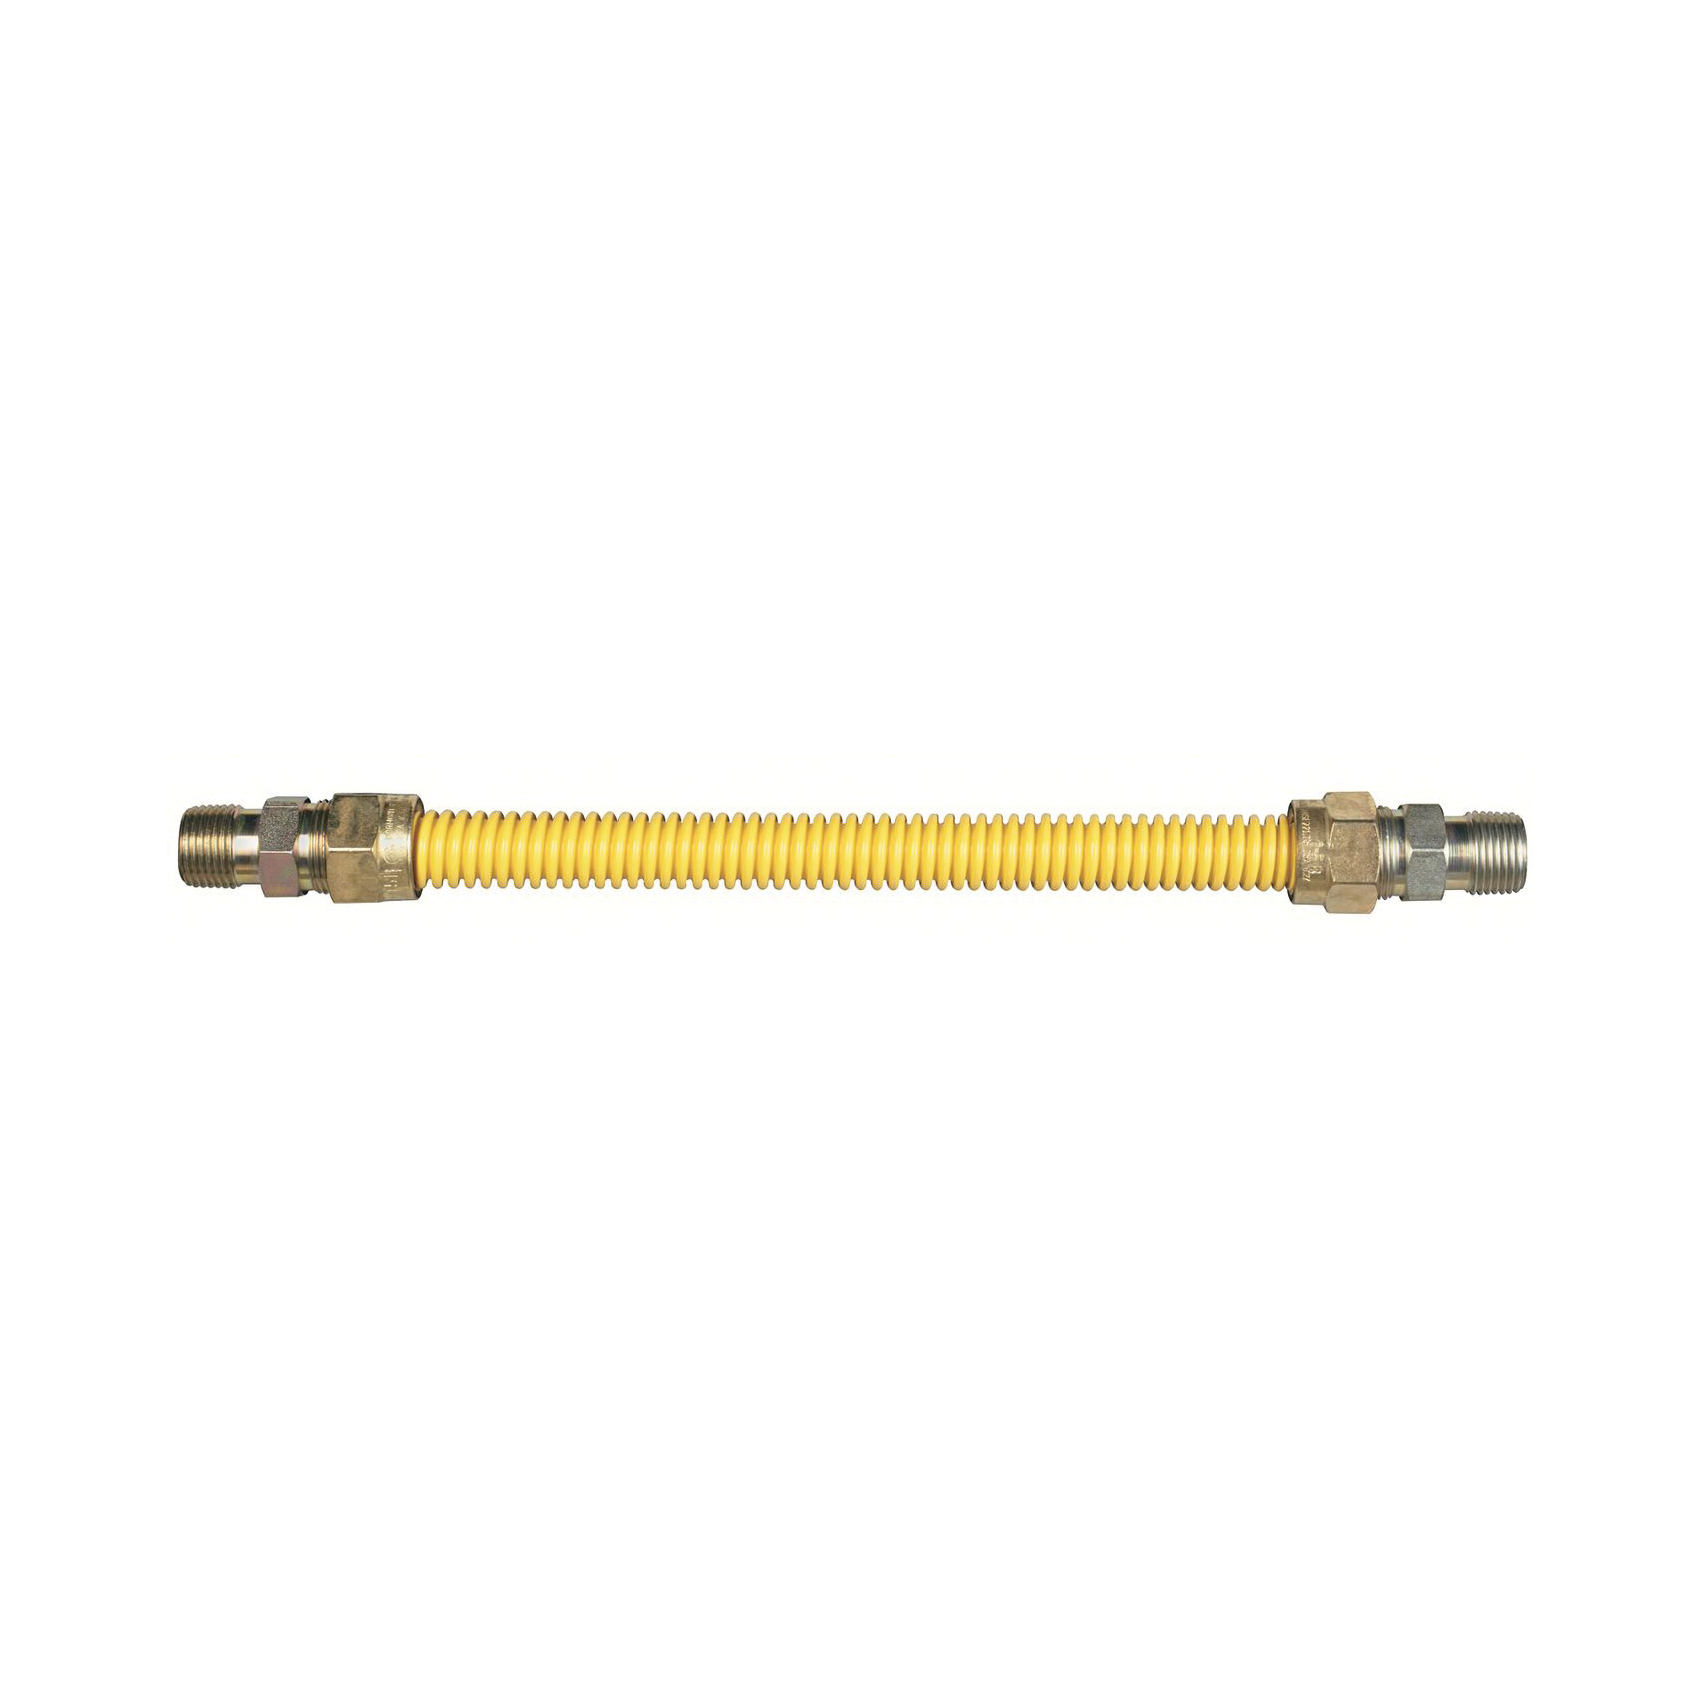 Dormont® 30C-3141-36 Gas Connector, MNPT x FNPT Connection, 1/2 x 3/4 in, 36 in L, 1/2 in ID, 5/8 in OD